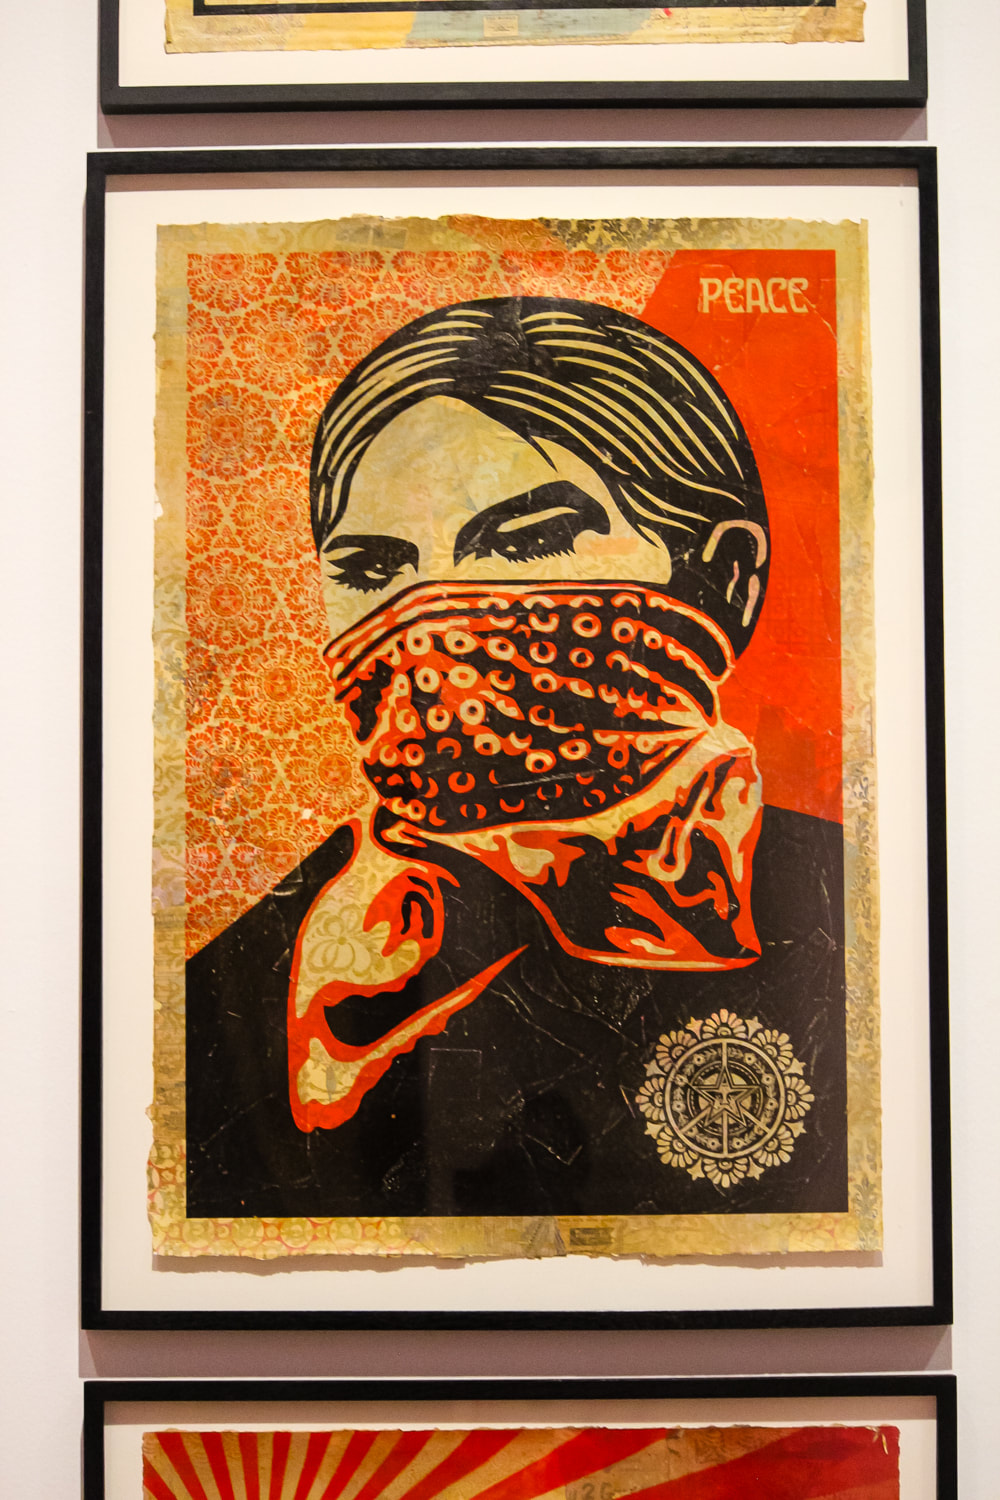 Singapore: Art From The Streets Exhibition at the ArtScience Museum - Zapatista Woman - Shepard Fairey - 2005.